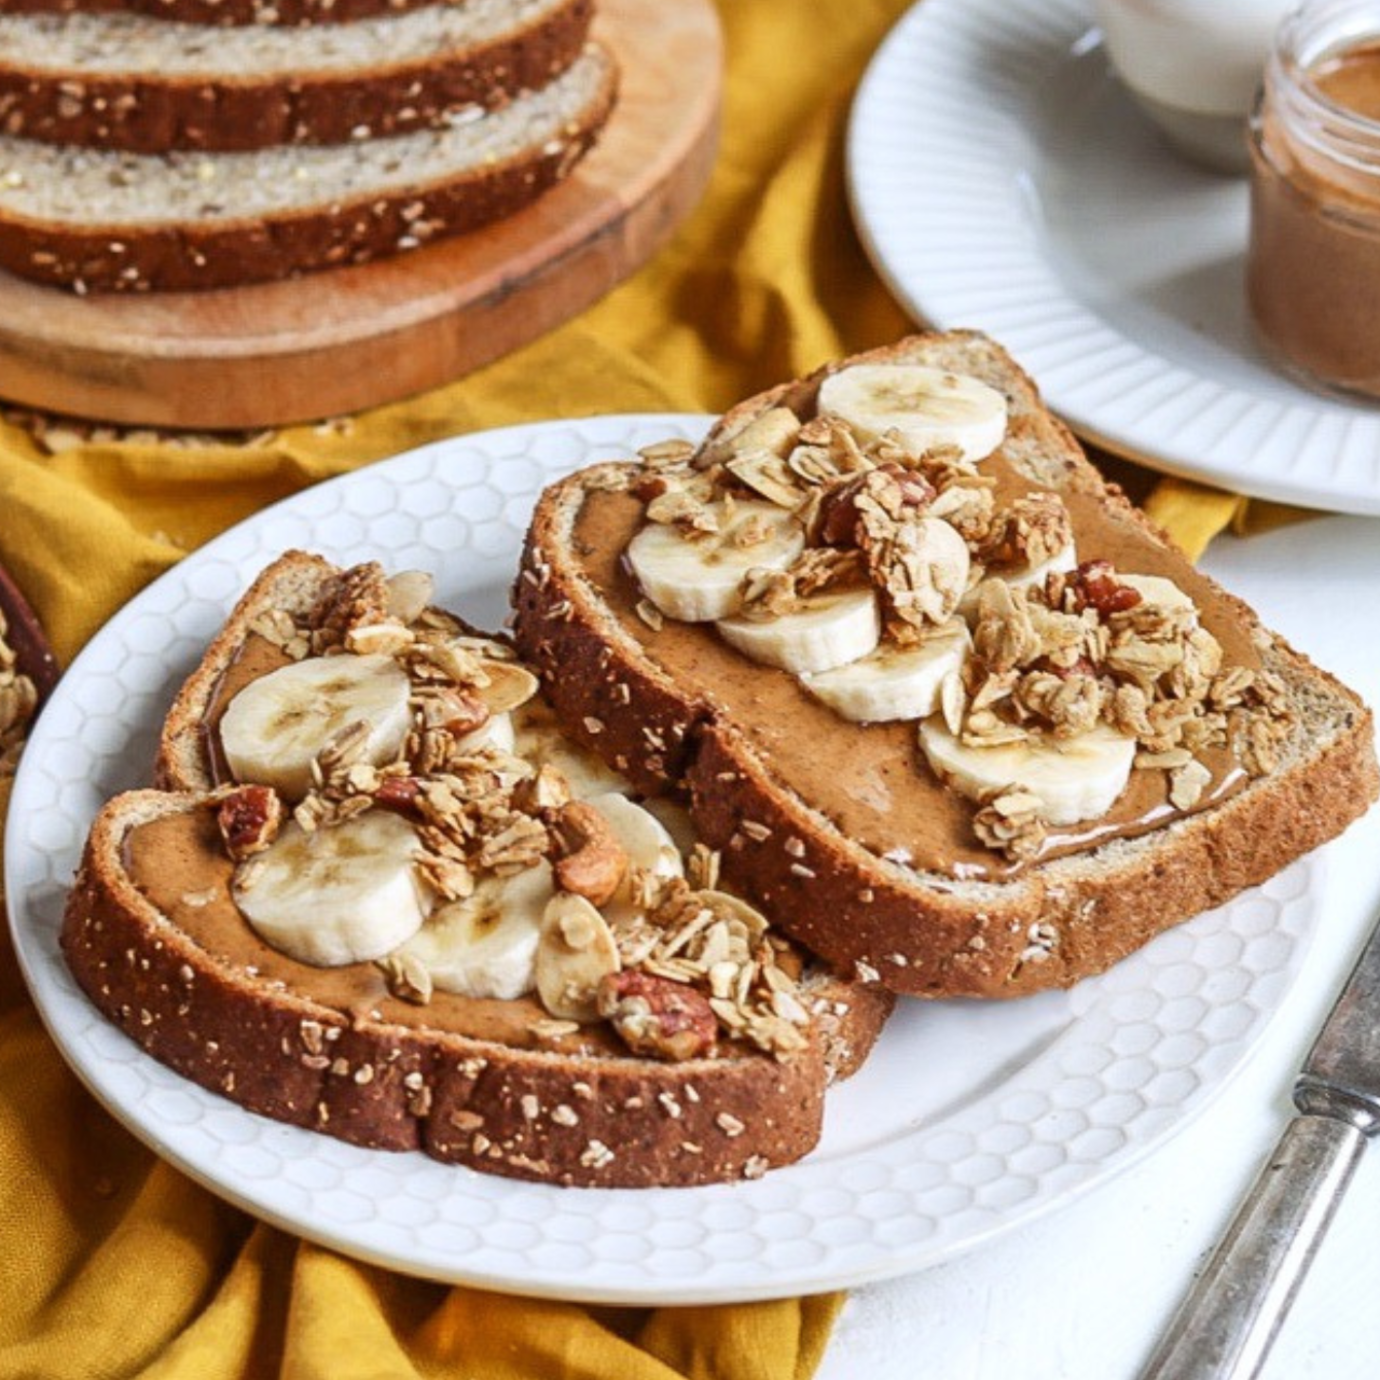 Almond butter toast with banana slices and granola